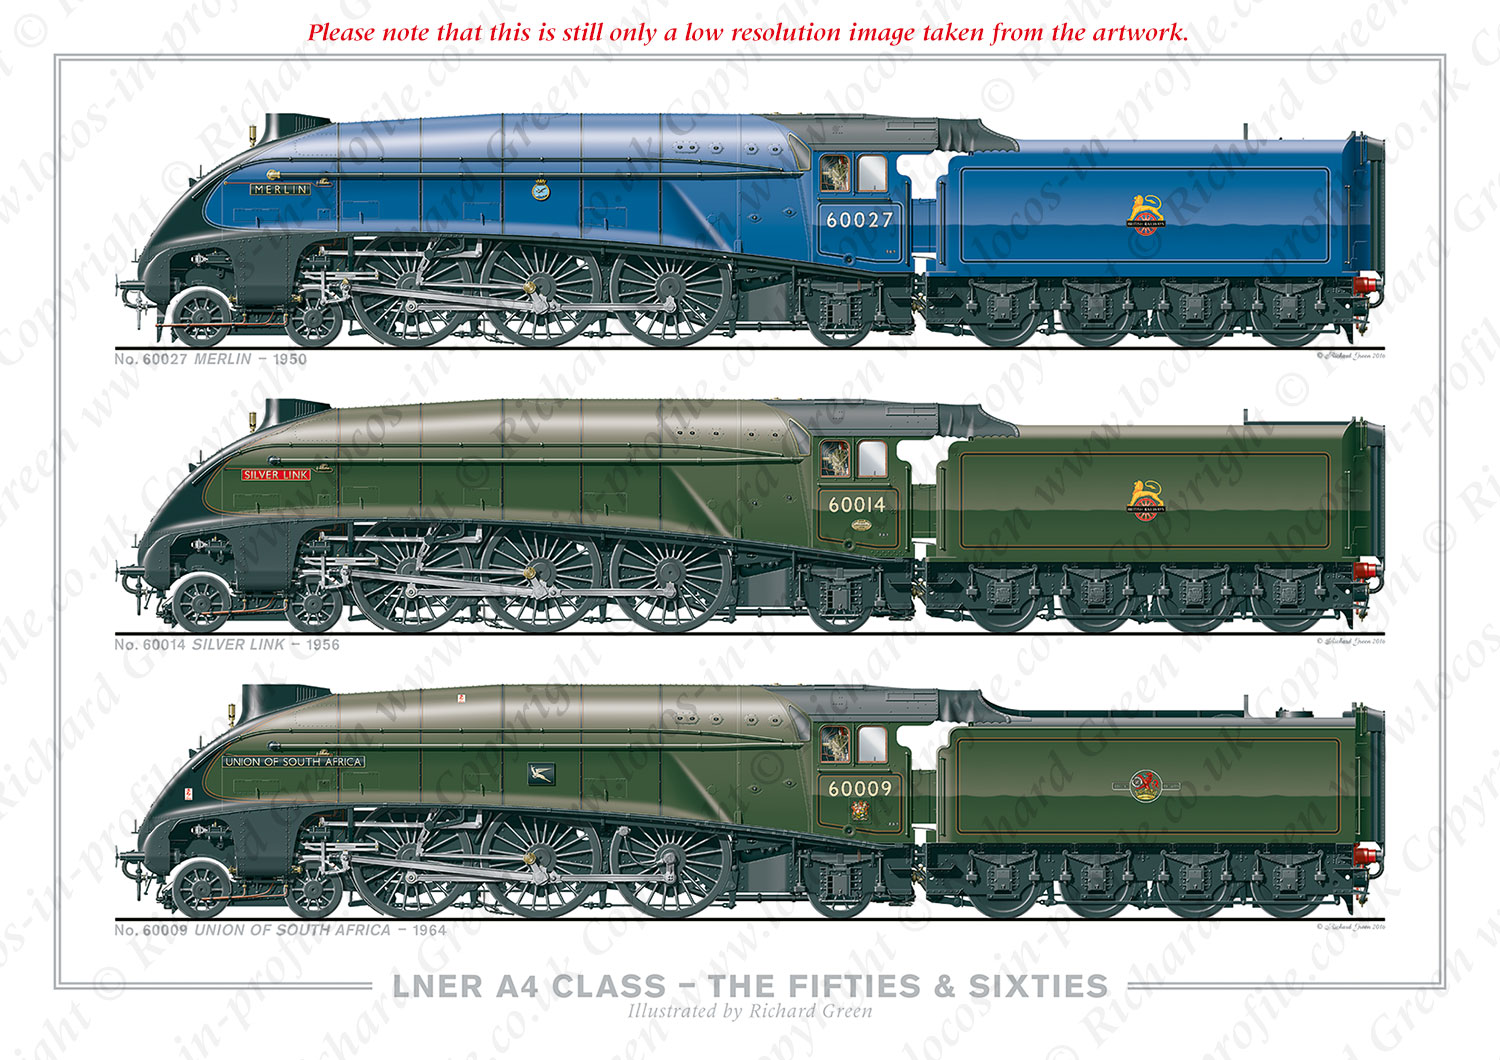 LNER 4-6-2 A4 Class and The Fifties & Sixties. No. 60027 Merlin (1950), No. 60014 Silver Link (1956), No. 60009 Union of South Africa (1964) (N. Gresley) Steam Locomotive Print